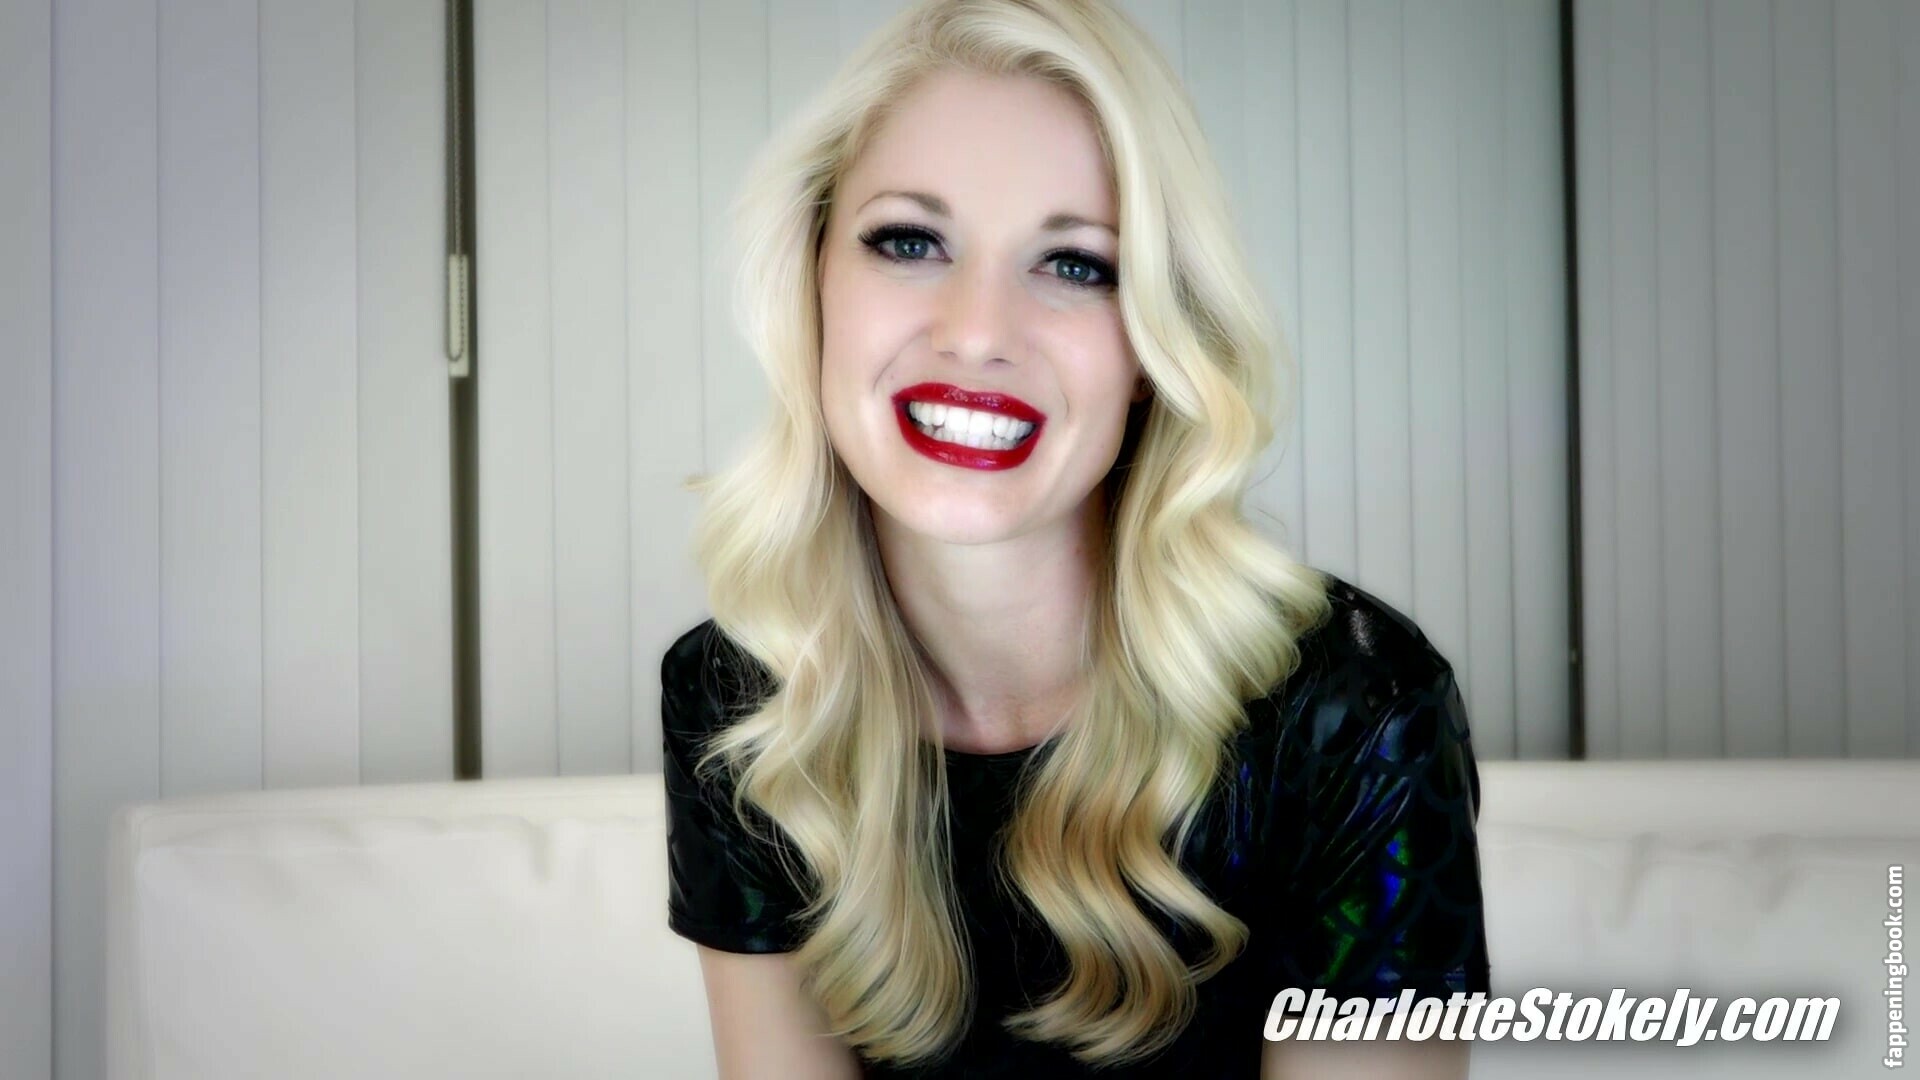 Charlotte Stokely Char Stokely Nude Onlyfans Leaks The Fappening Photo 5621498